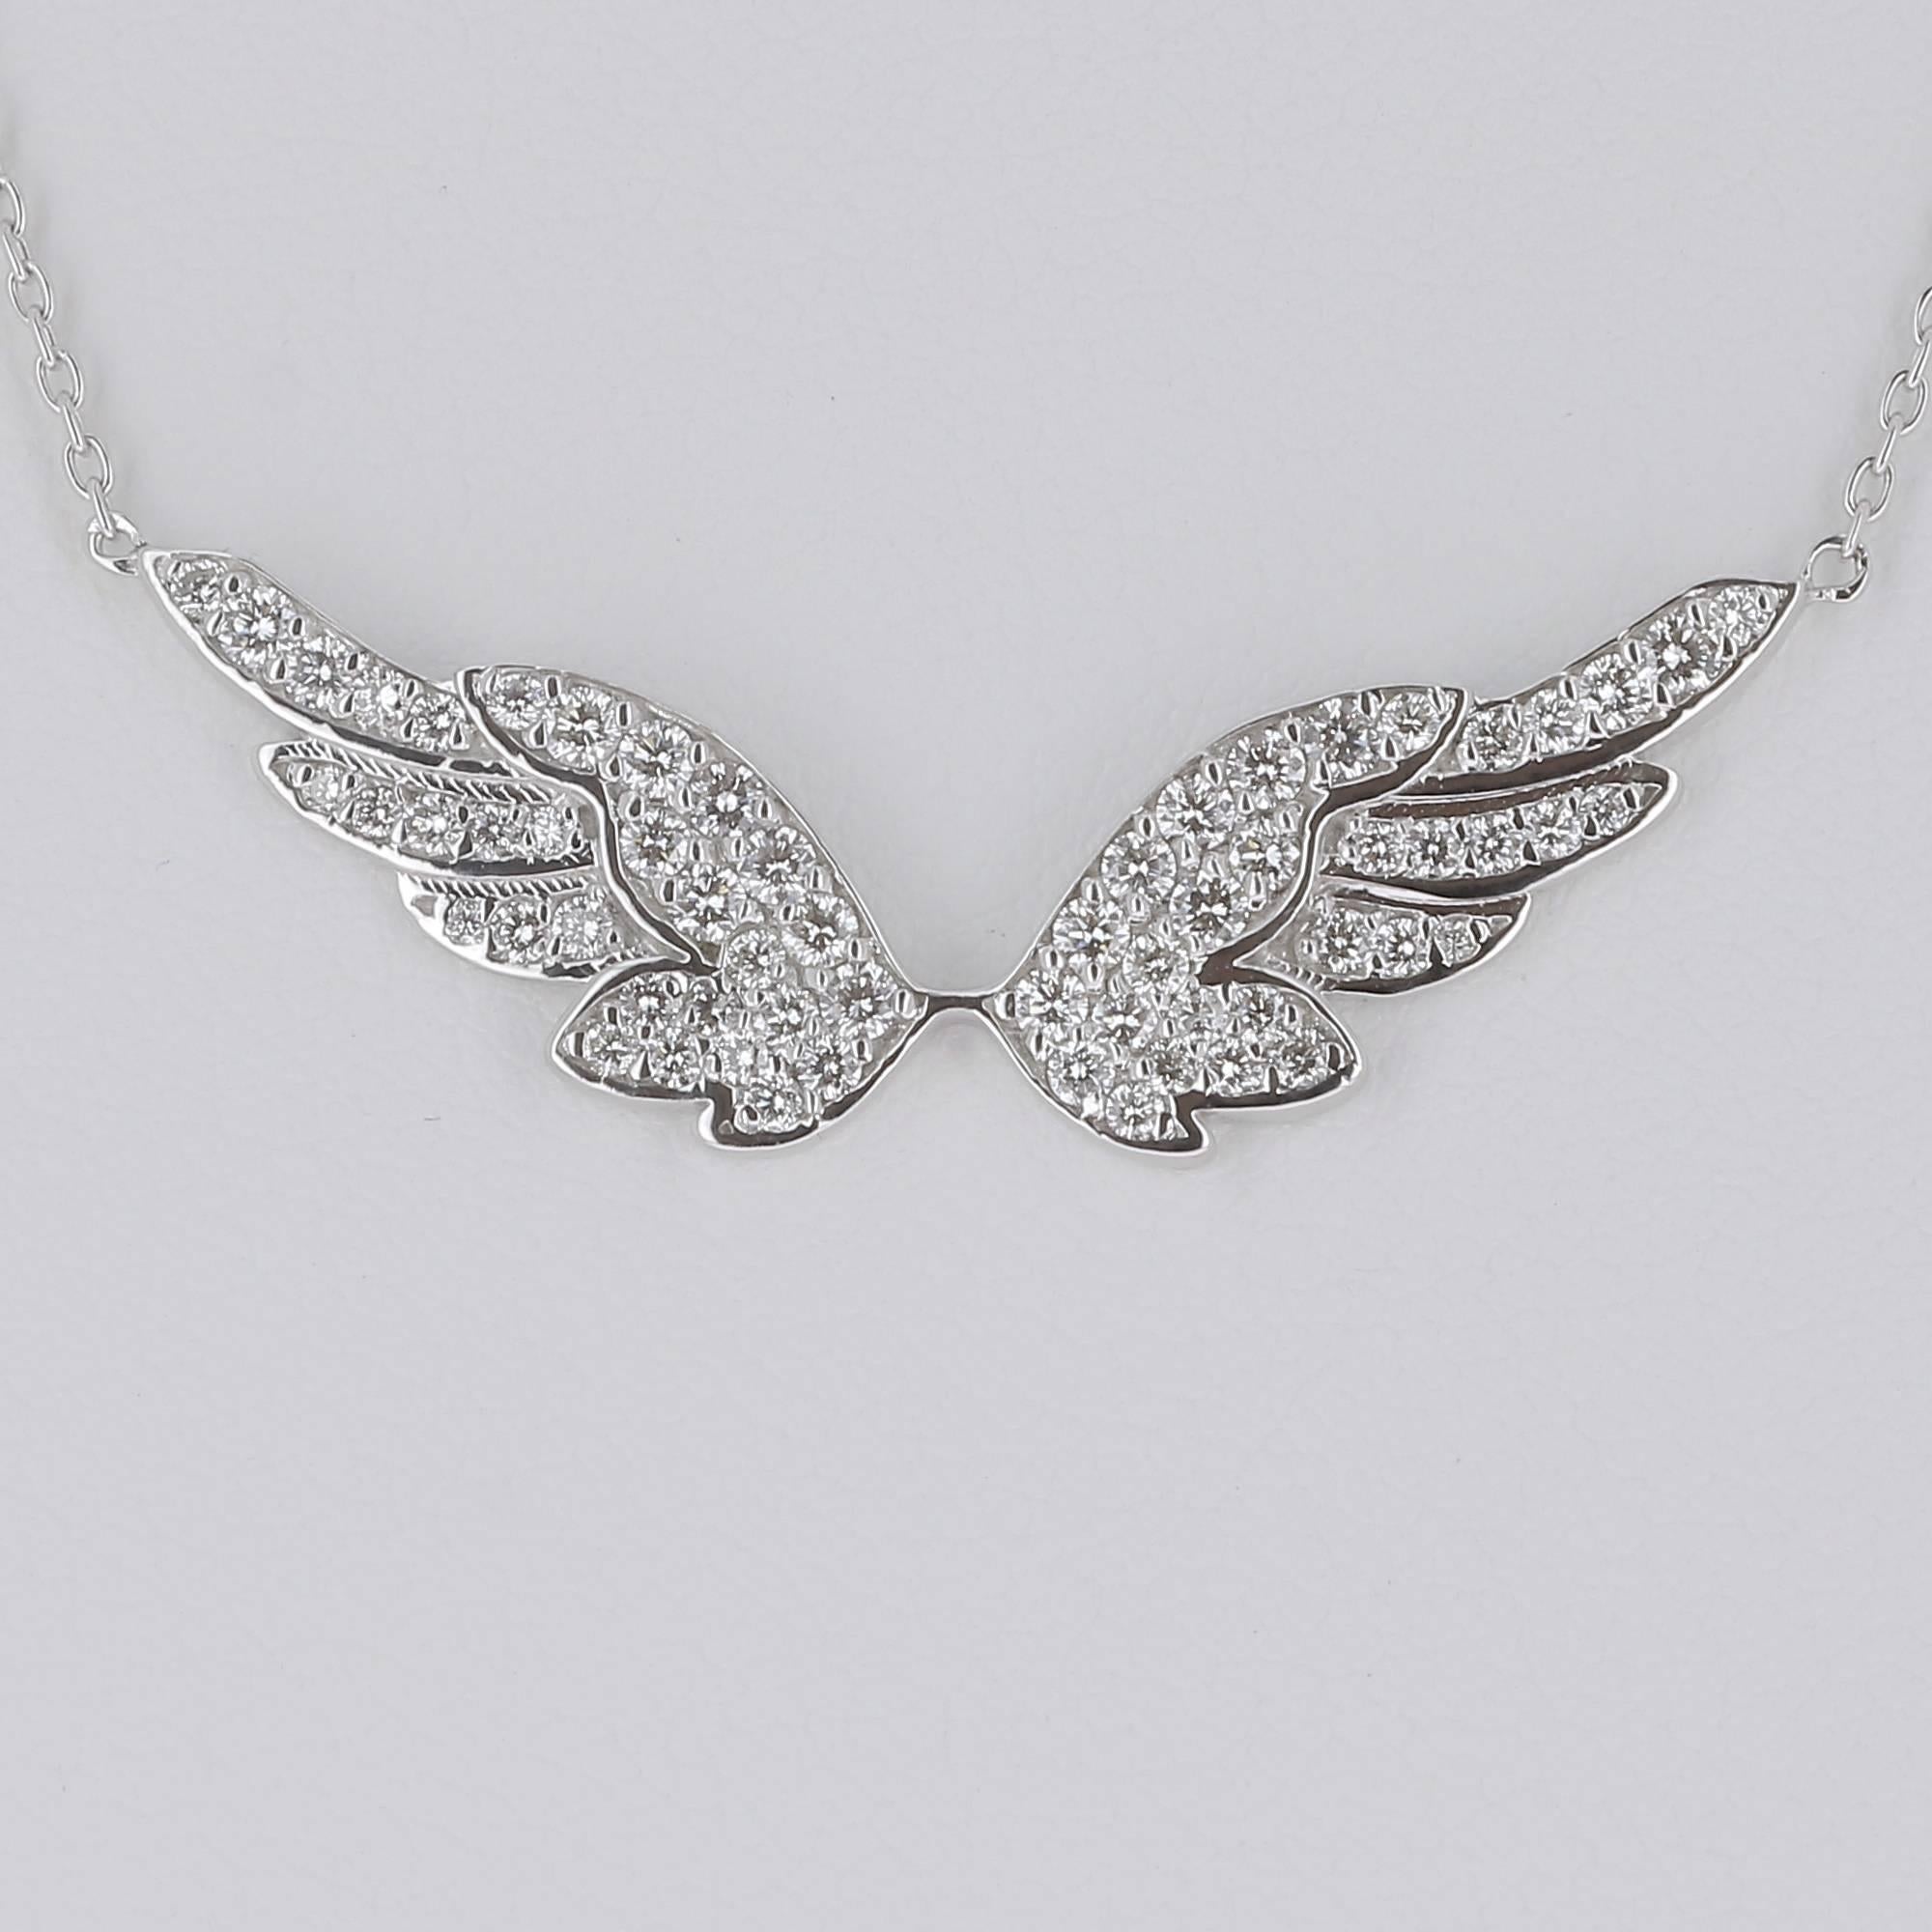 Pendant in the shape of wings totally paved by diamonds weighing 0,74 carats suspended from a chain (channel) of 40 cm
The Diamonds qualities is GVS.
The Necklace Chain is 18K White Gold and is also available in 18K Yellow Gold and 18K Pink Gold.